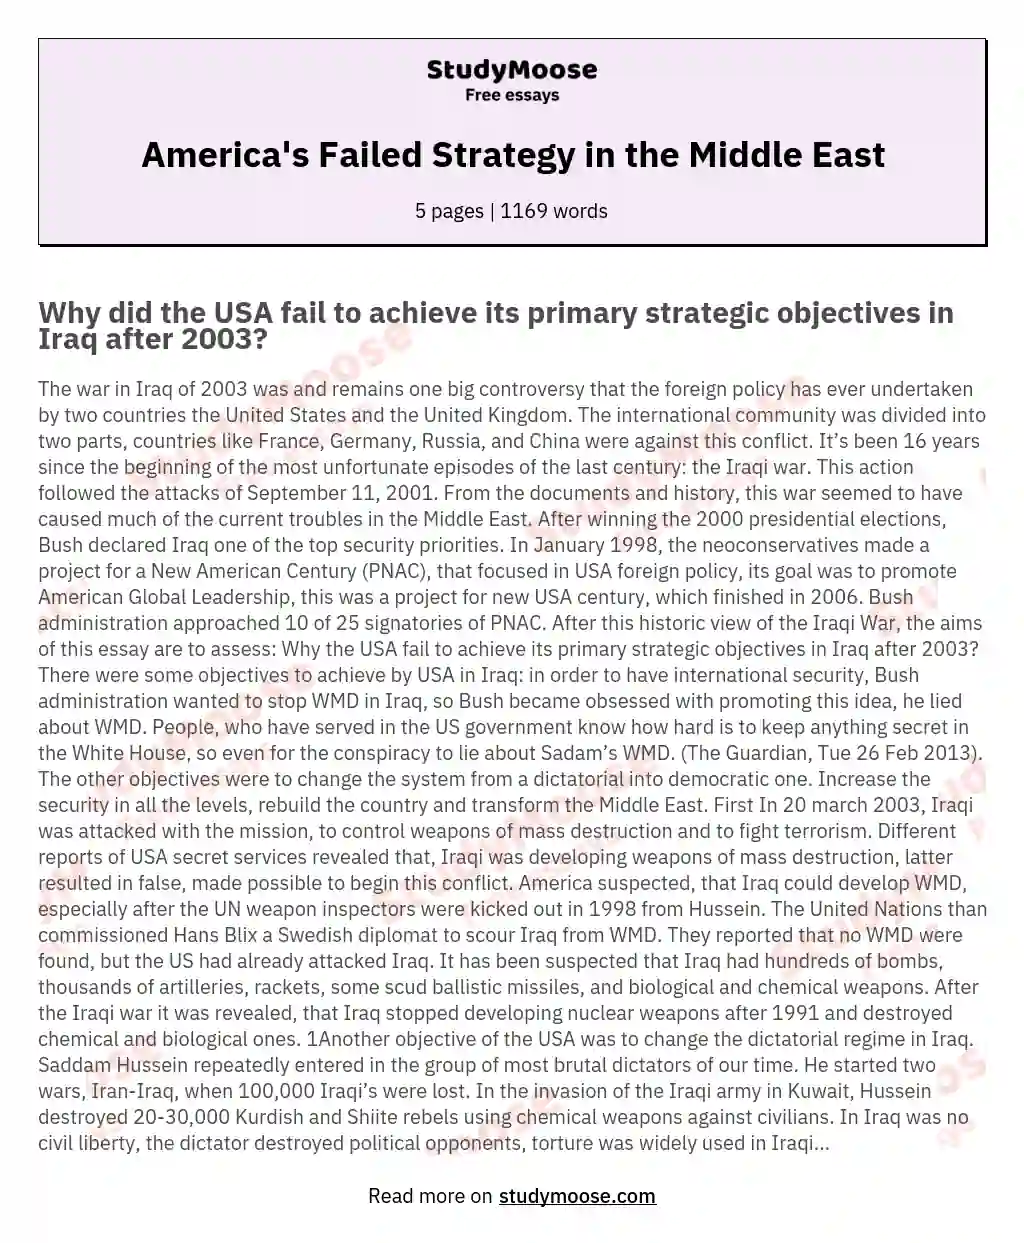 America's Failed Strategy in the Middle East essay